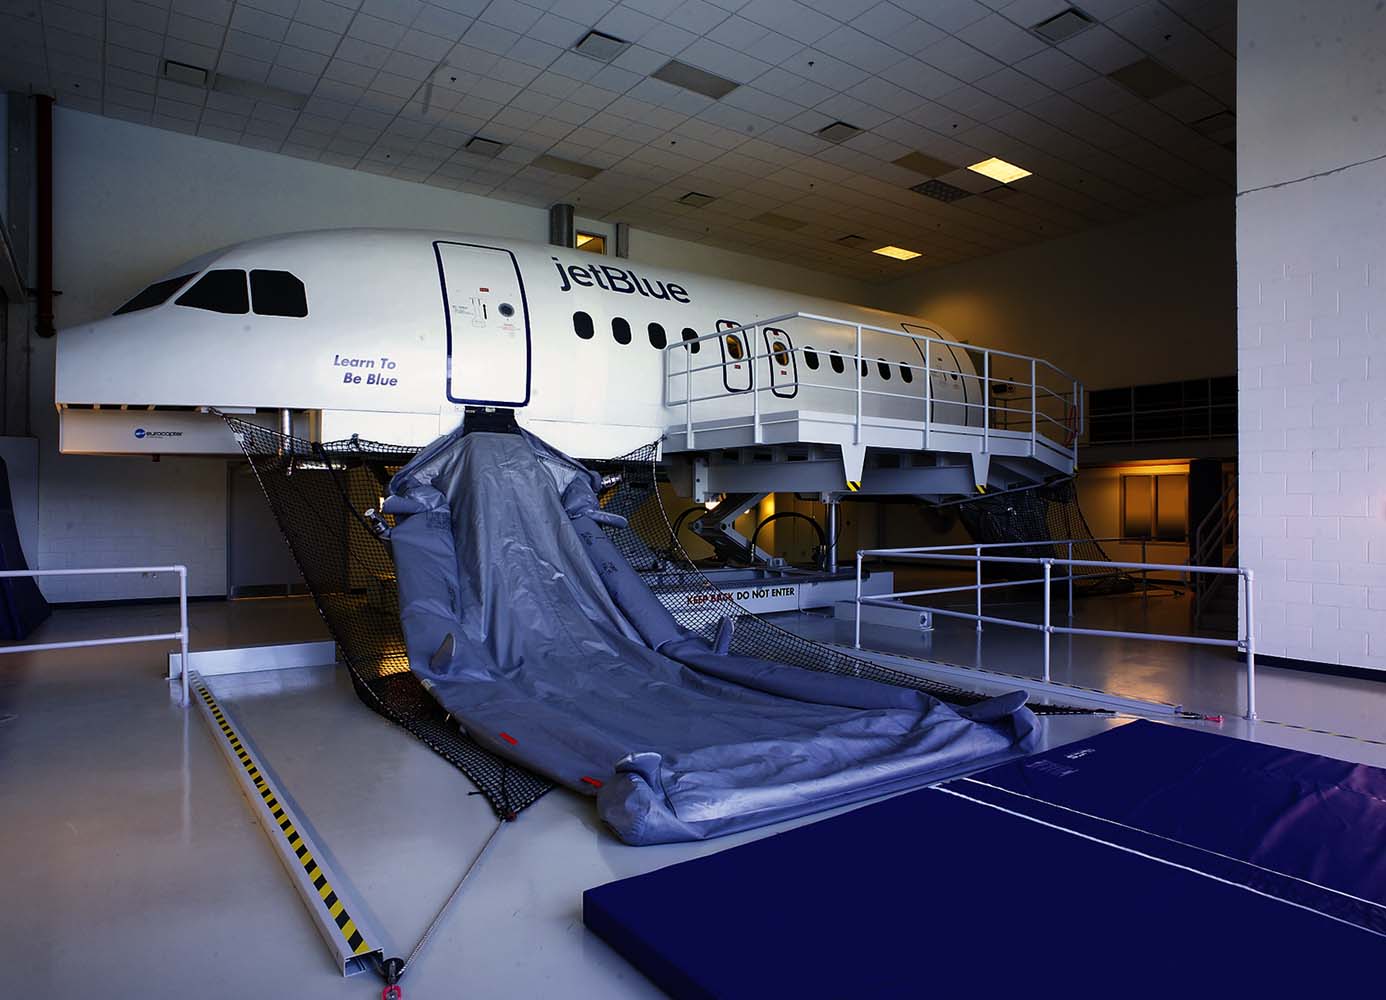 JetBlue Training Facility - Workforce Development Gallery - On the Boards and More Page